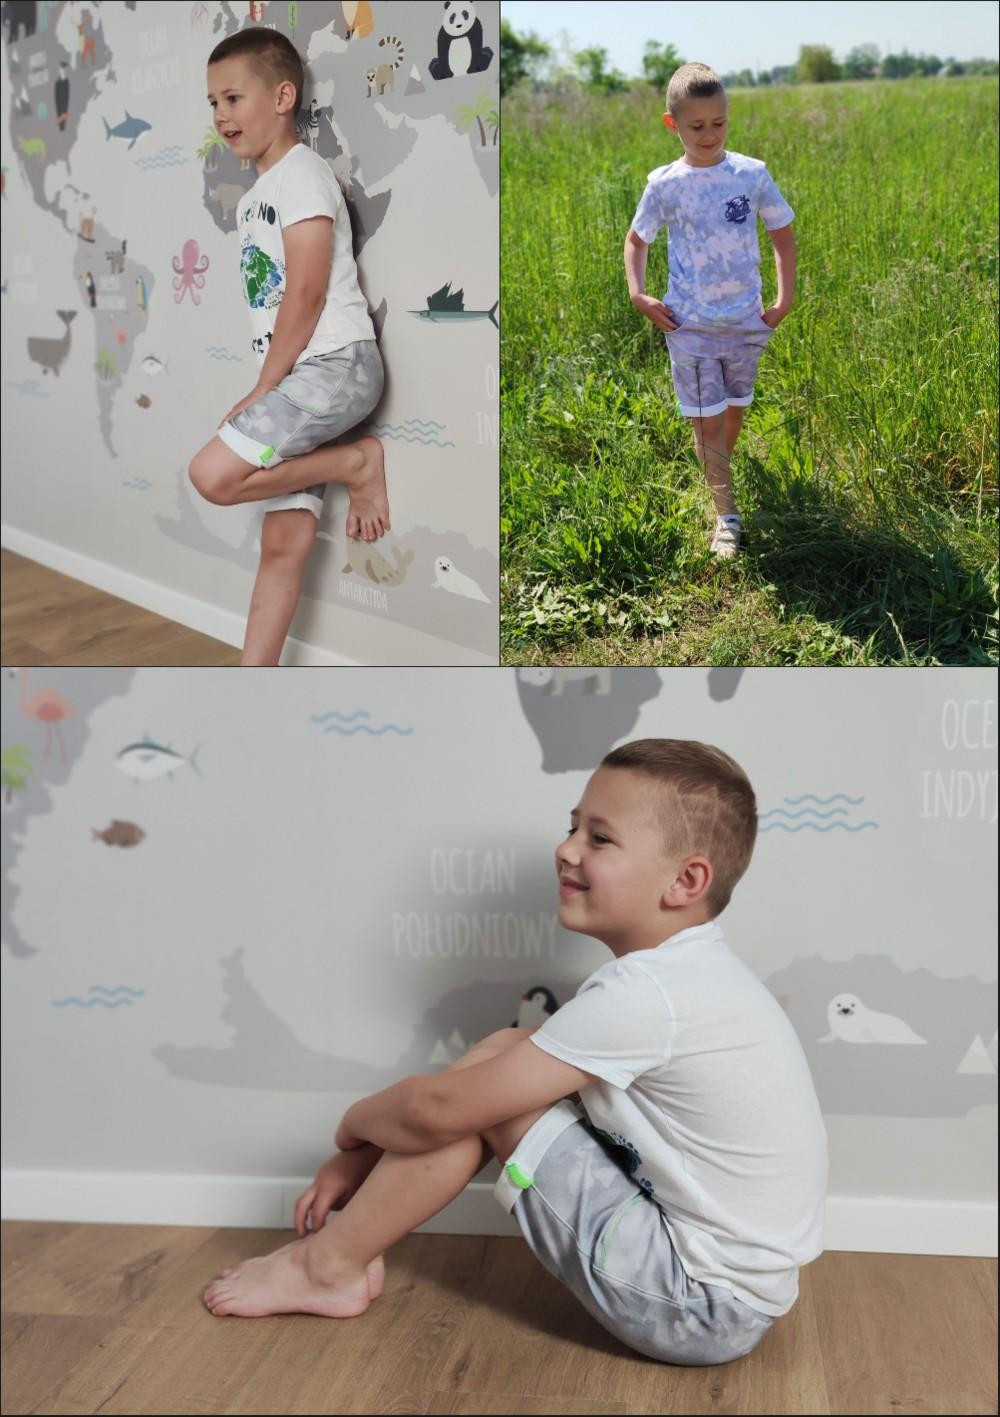 KID`S SHORTS (RIO) - MINI KINGFISHERS AND LILACS (KINGFISHERS IN THE MEADOW) / white - looped knit fabric 